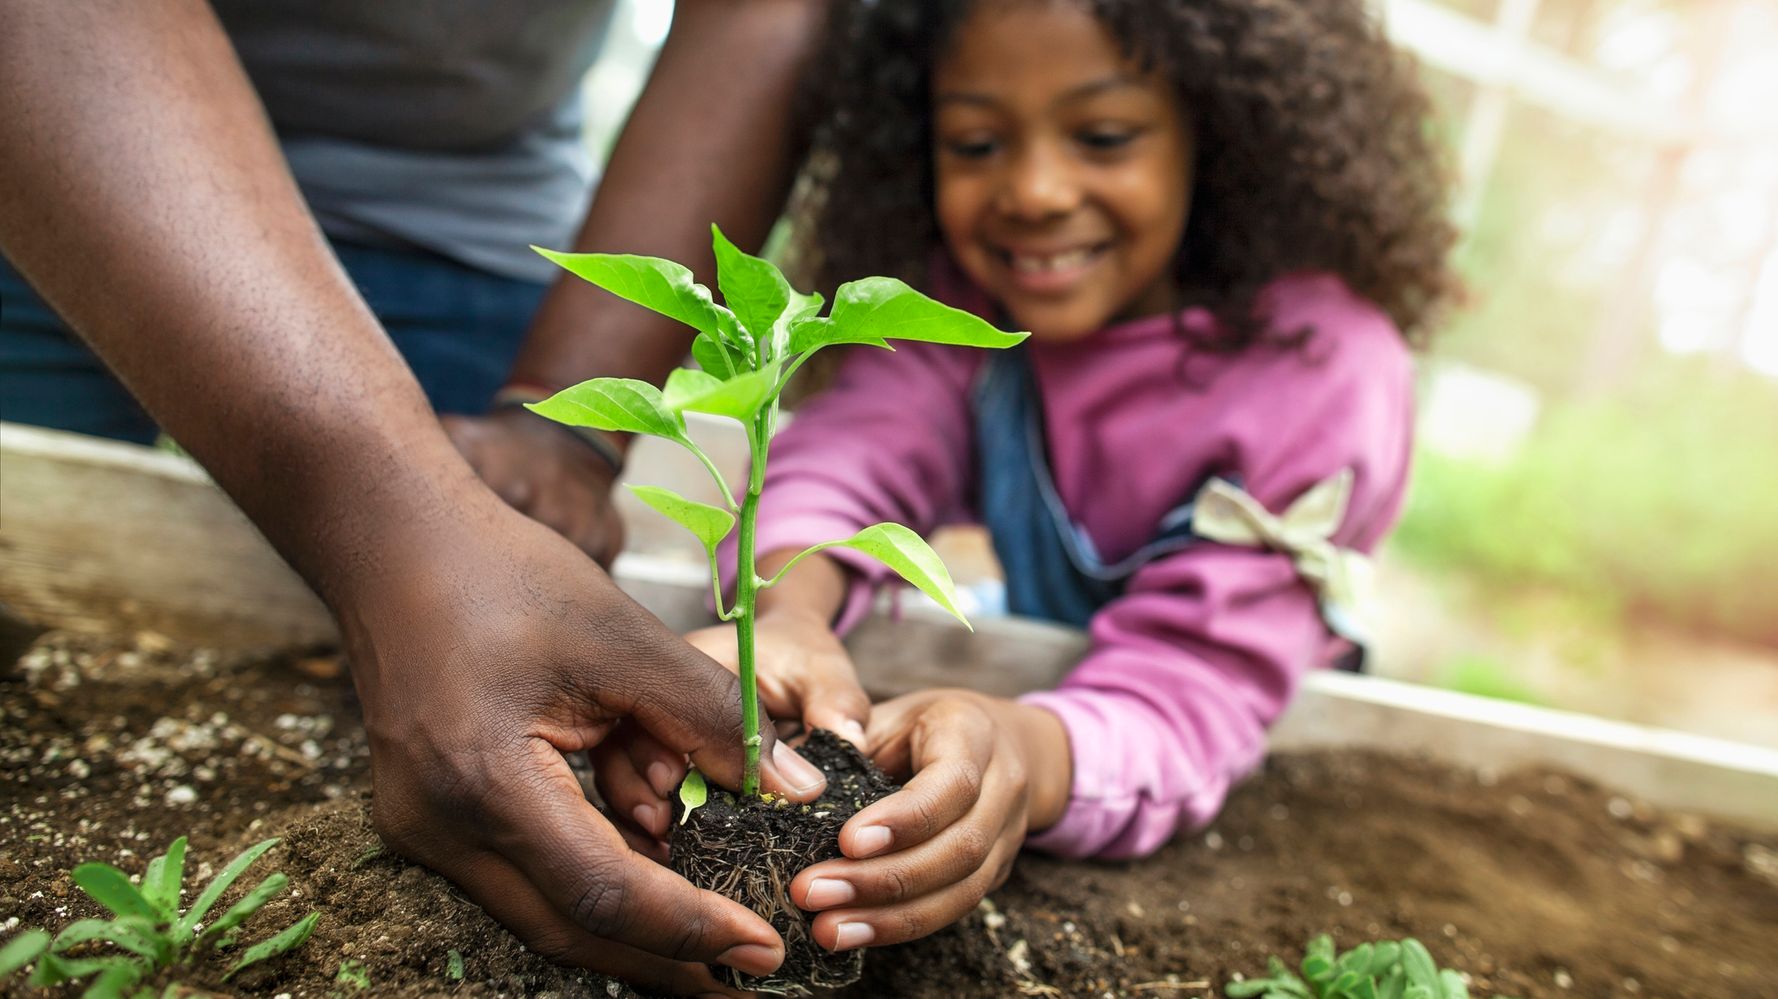 A young girl plants a sprout in a garden with the help of an adult.